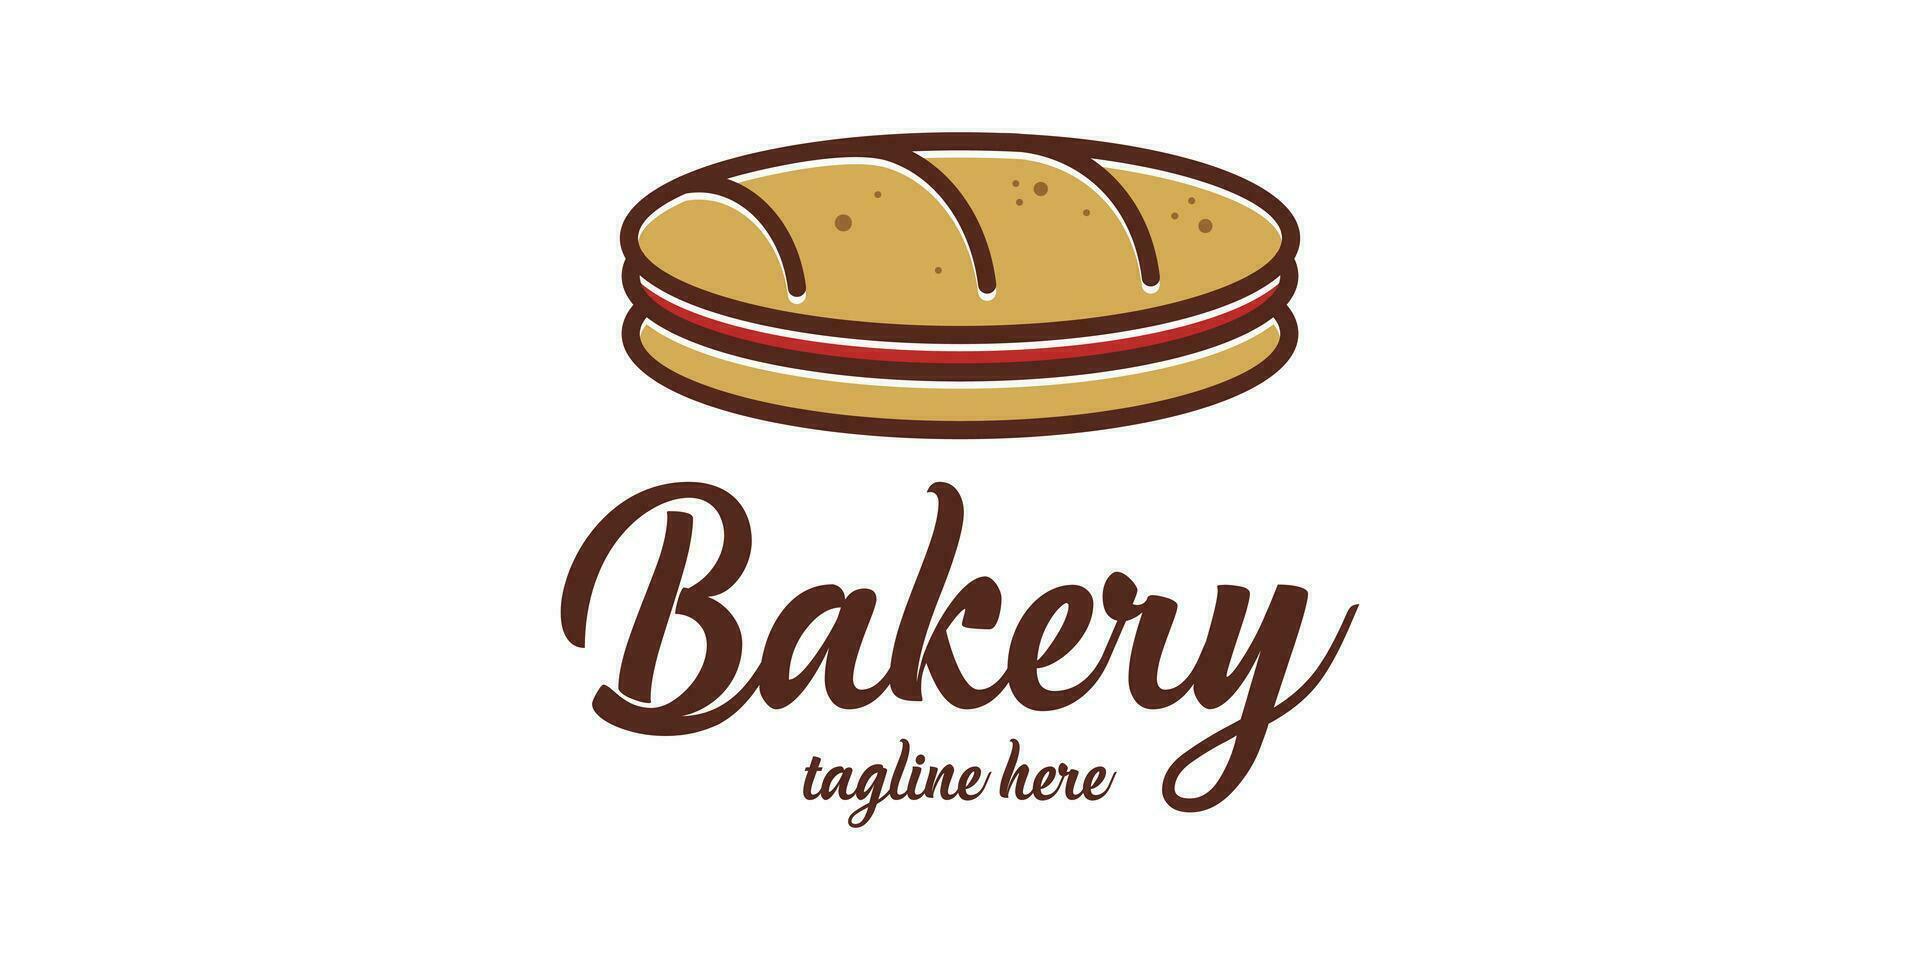 bakery logo design with a bread icon made with minimalist lines. vector